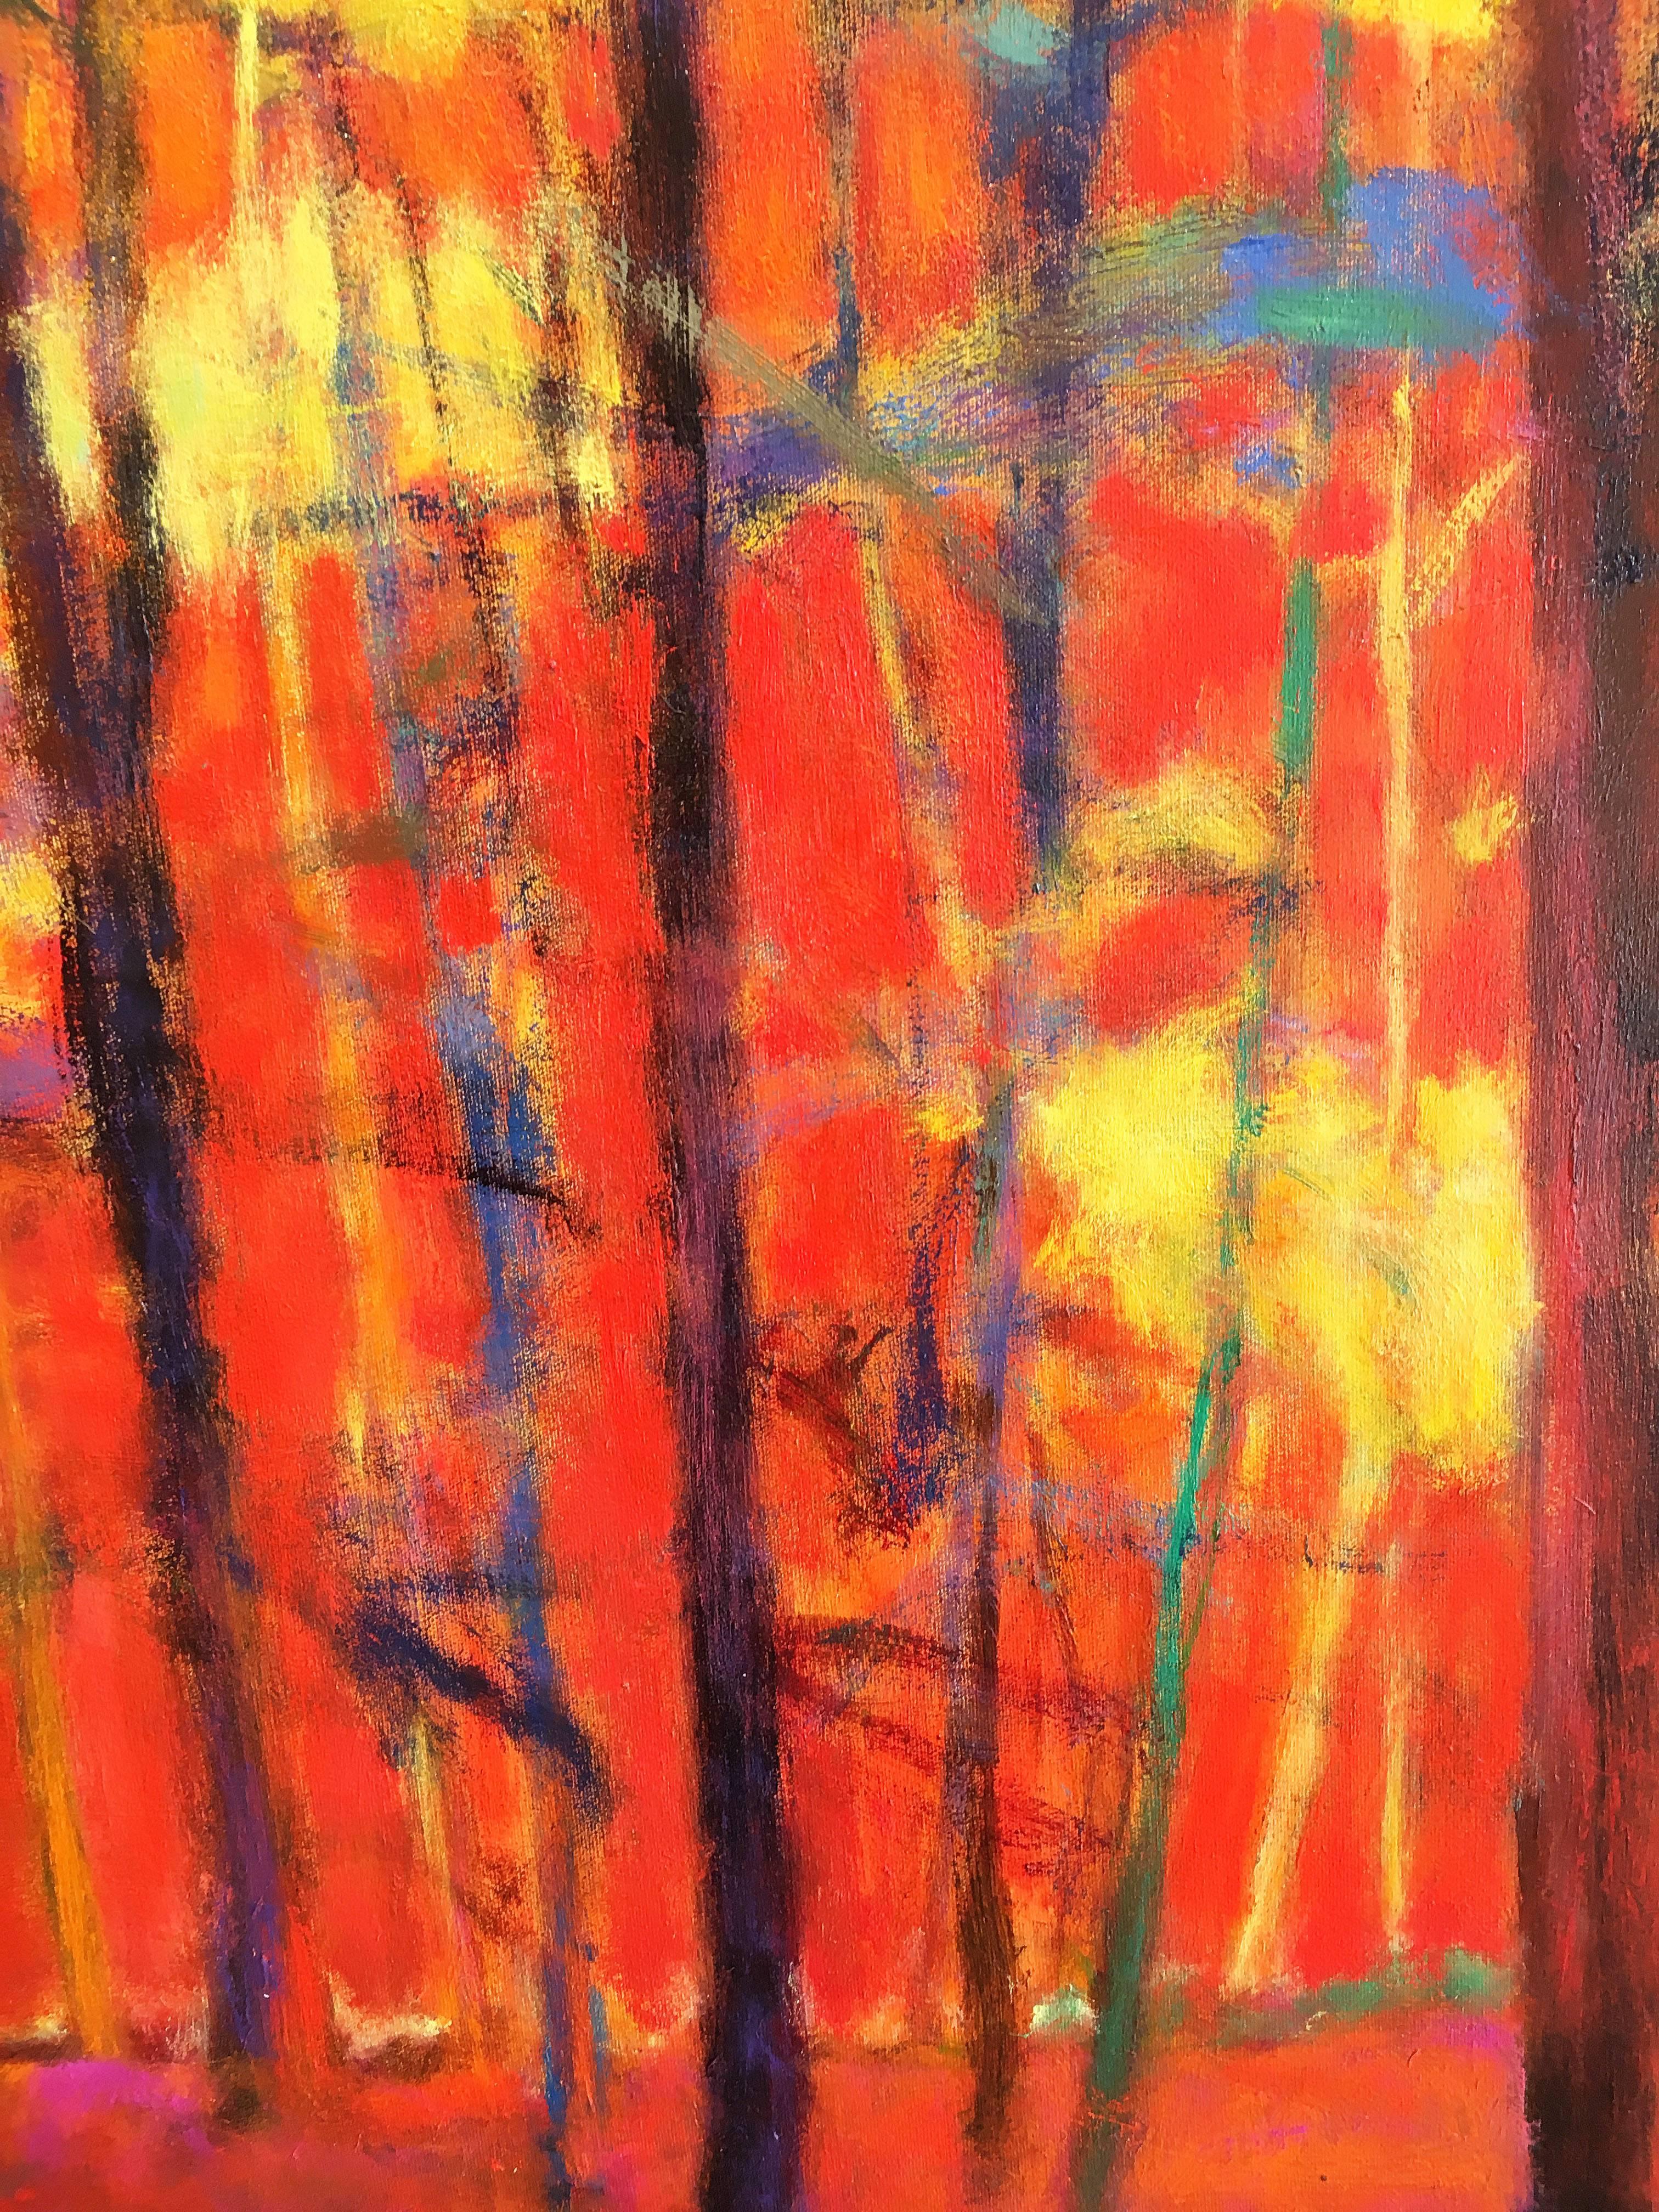 Brightly Lit Woods - Neo-Expressionist Painting by Ken Elliott